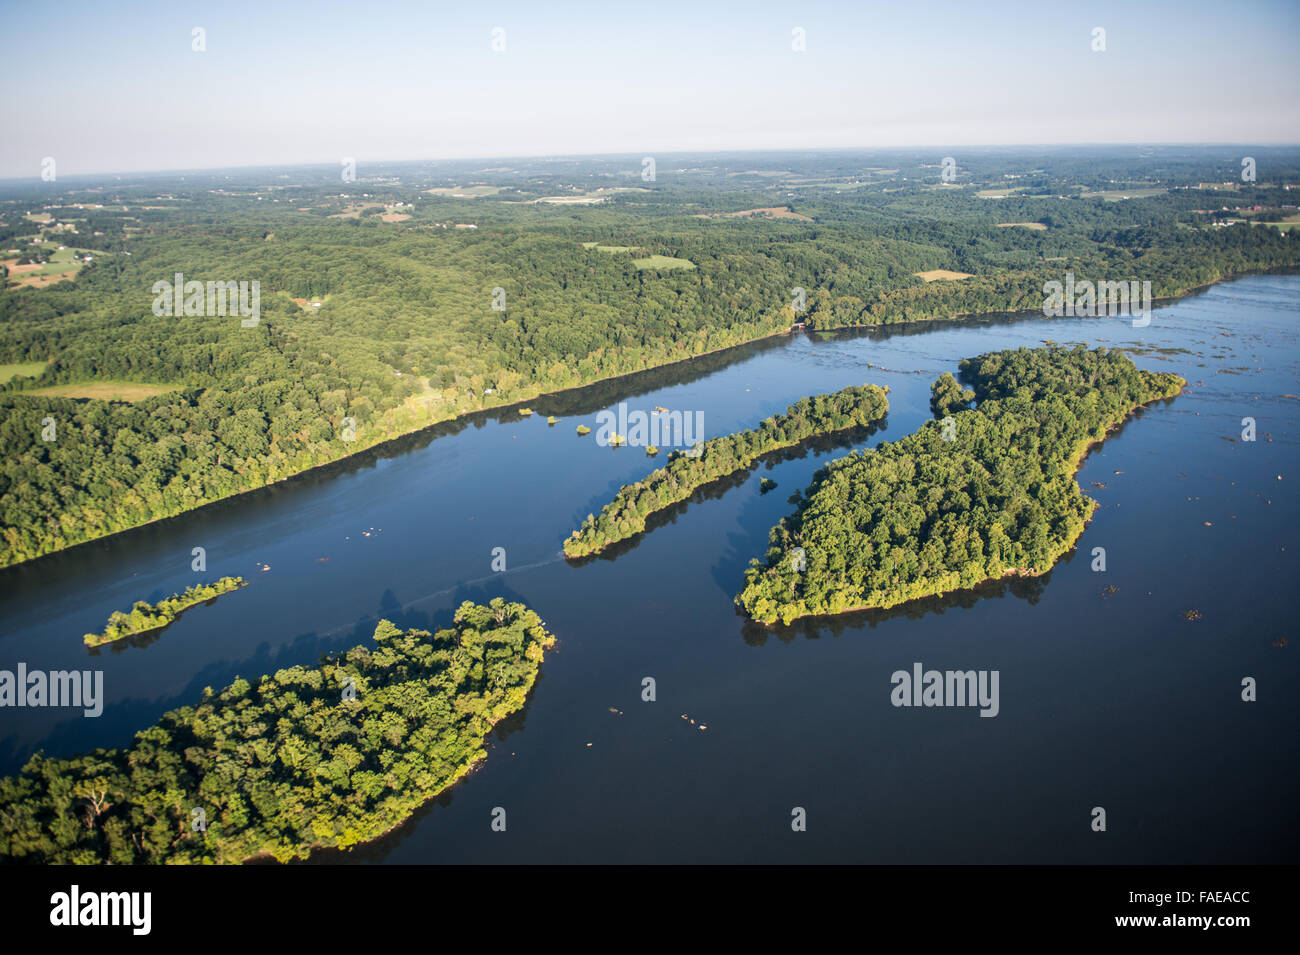 Aerial view of a portion of the Susquehanna River Stock Photo